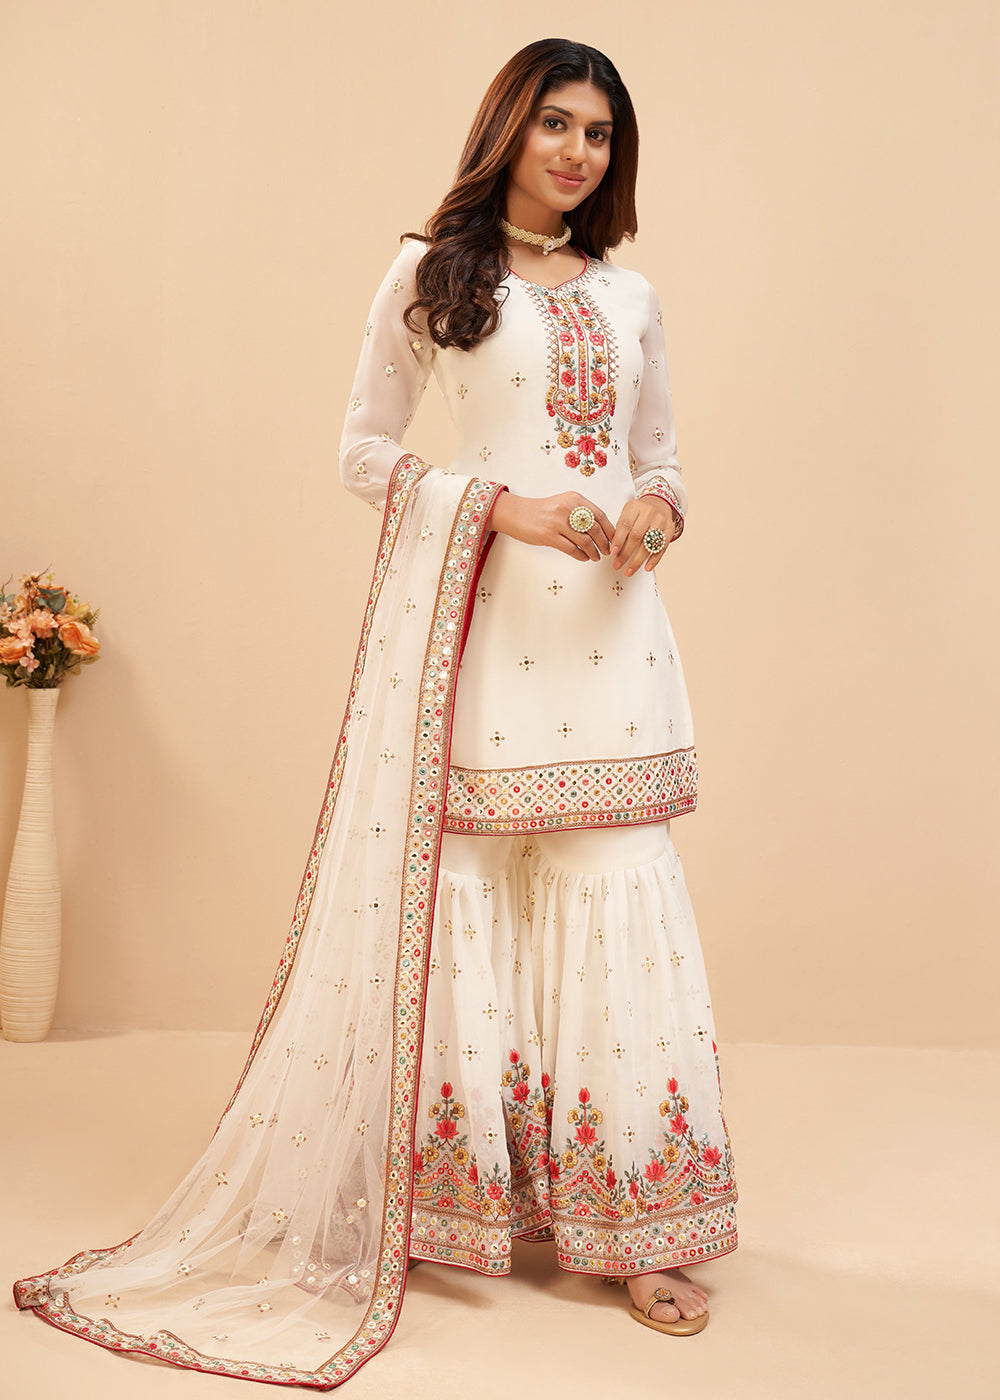 Shop Now Splendid Off White Wedding Embroidered Sharara Suit Online at Empress Clothing in USA, UK, Canada, Germany & Worldwide